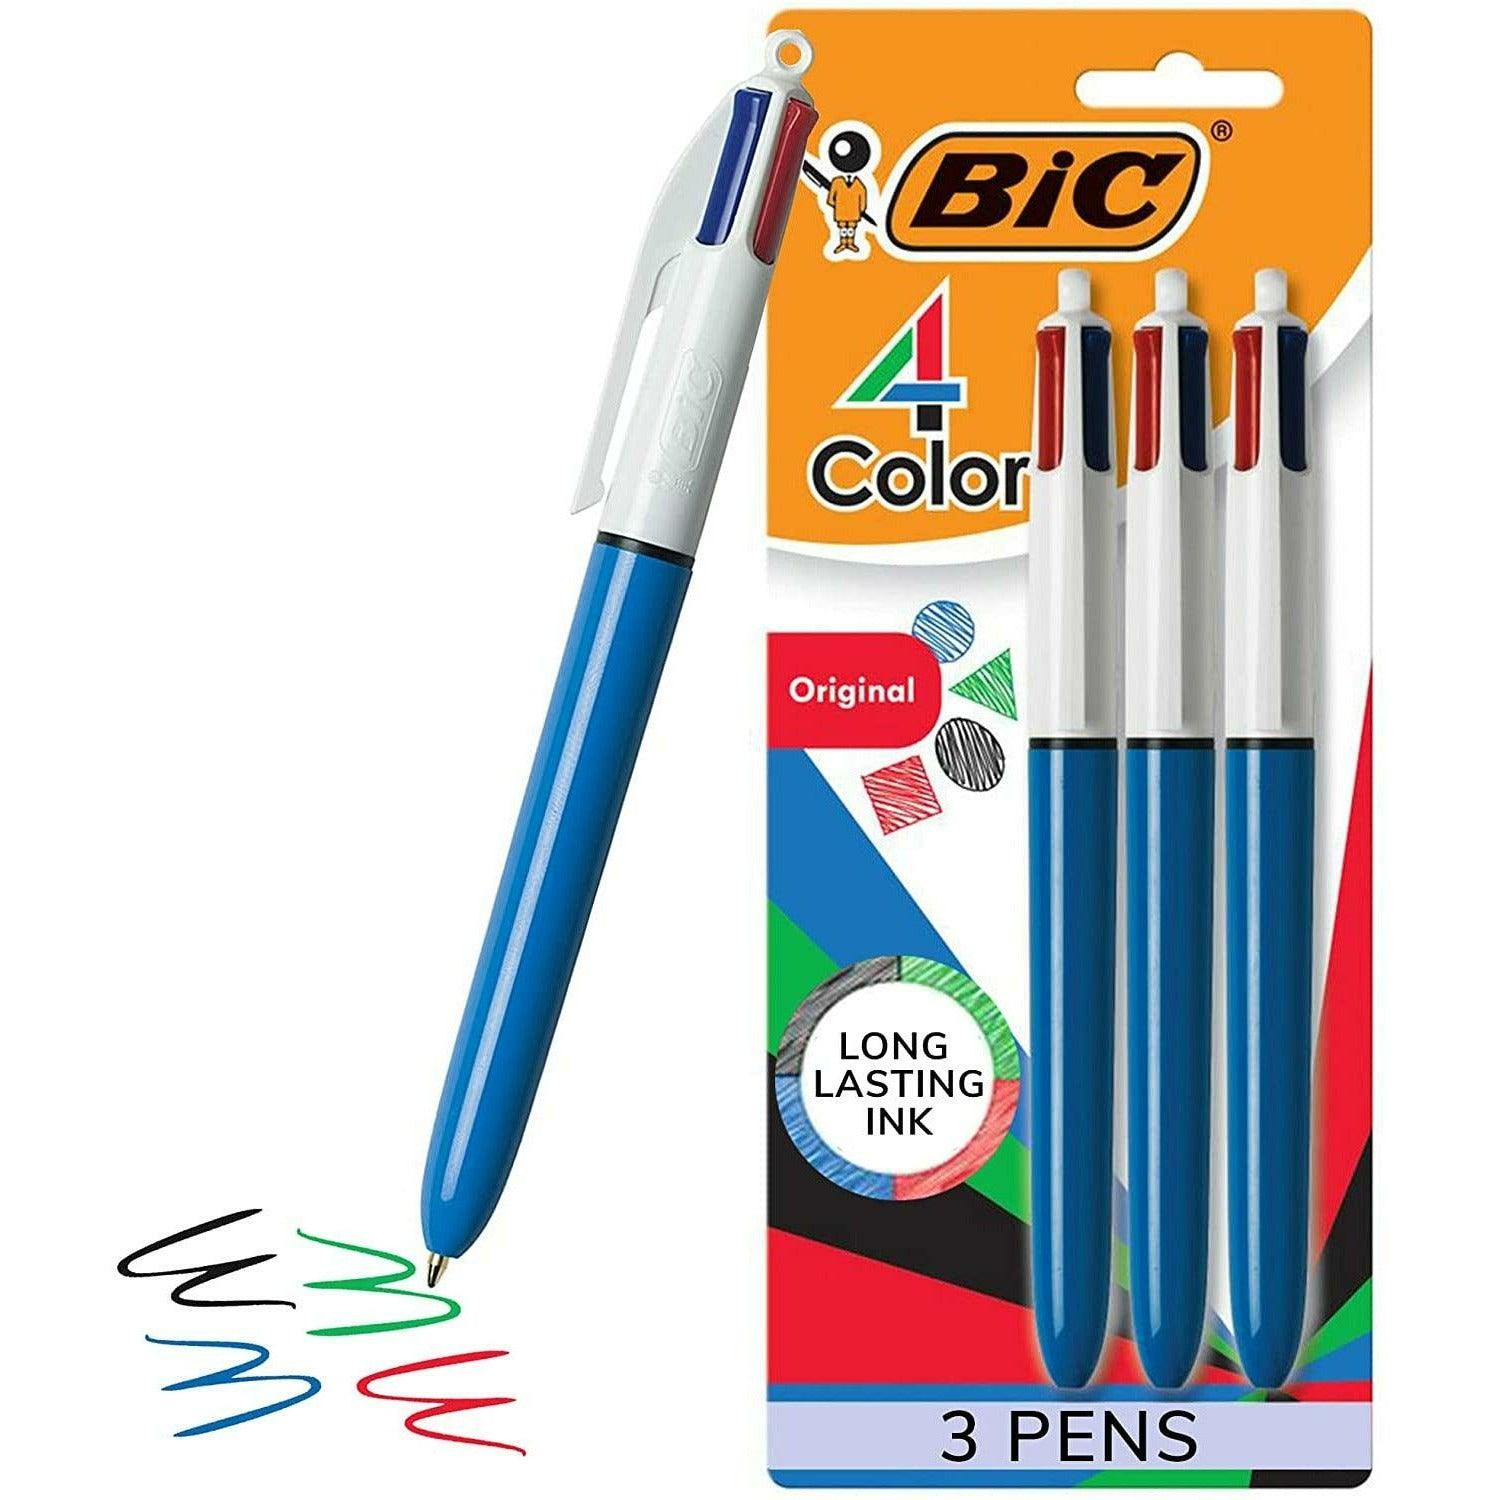 BIC 4 Color Ballpoint Pen, Medium Point (1.0mm), 4 Colors in 1 Set of Multicolor Pens, 3-Count Pack of Refillable Pens for Journaling and Organizing - BumbleToys - 14 Years & Up, 18+, 5-7 Years, 6+ Years, 8-13 Years, Drawing & Painting, OXE, Pencil, School Supplies, Stationery & Stickers